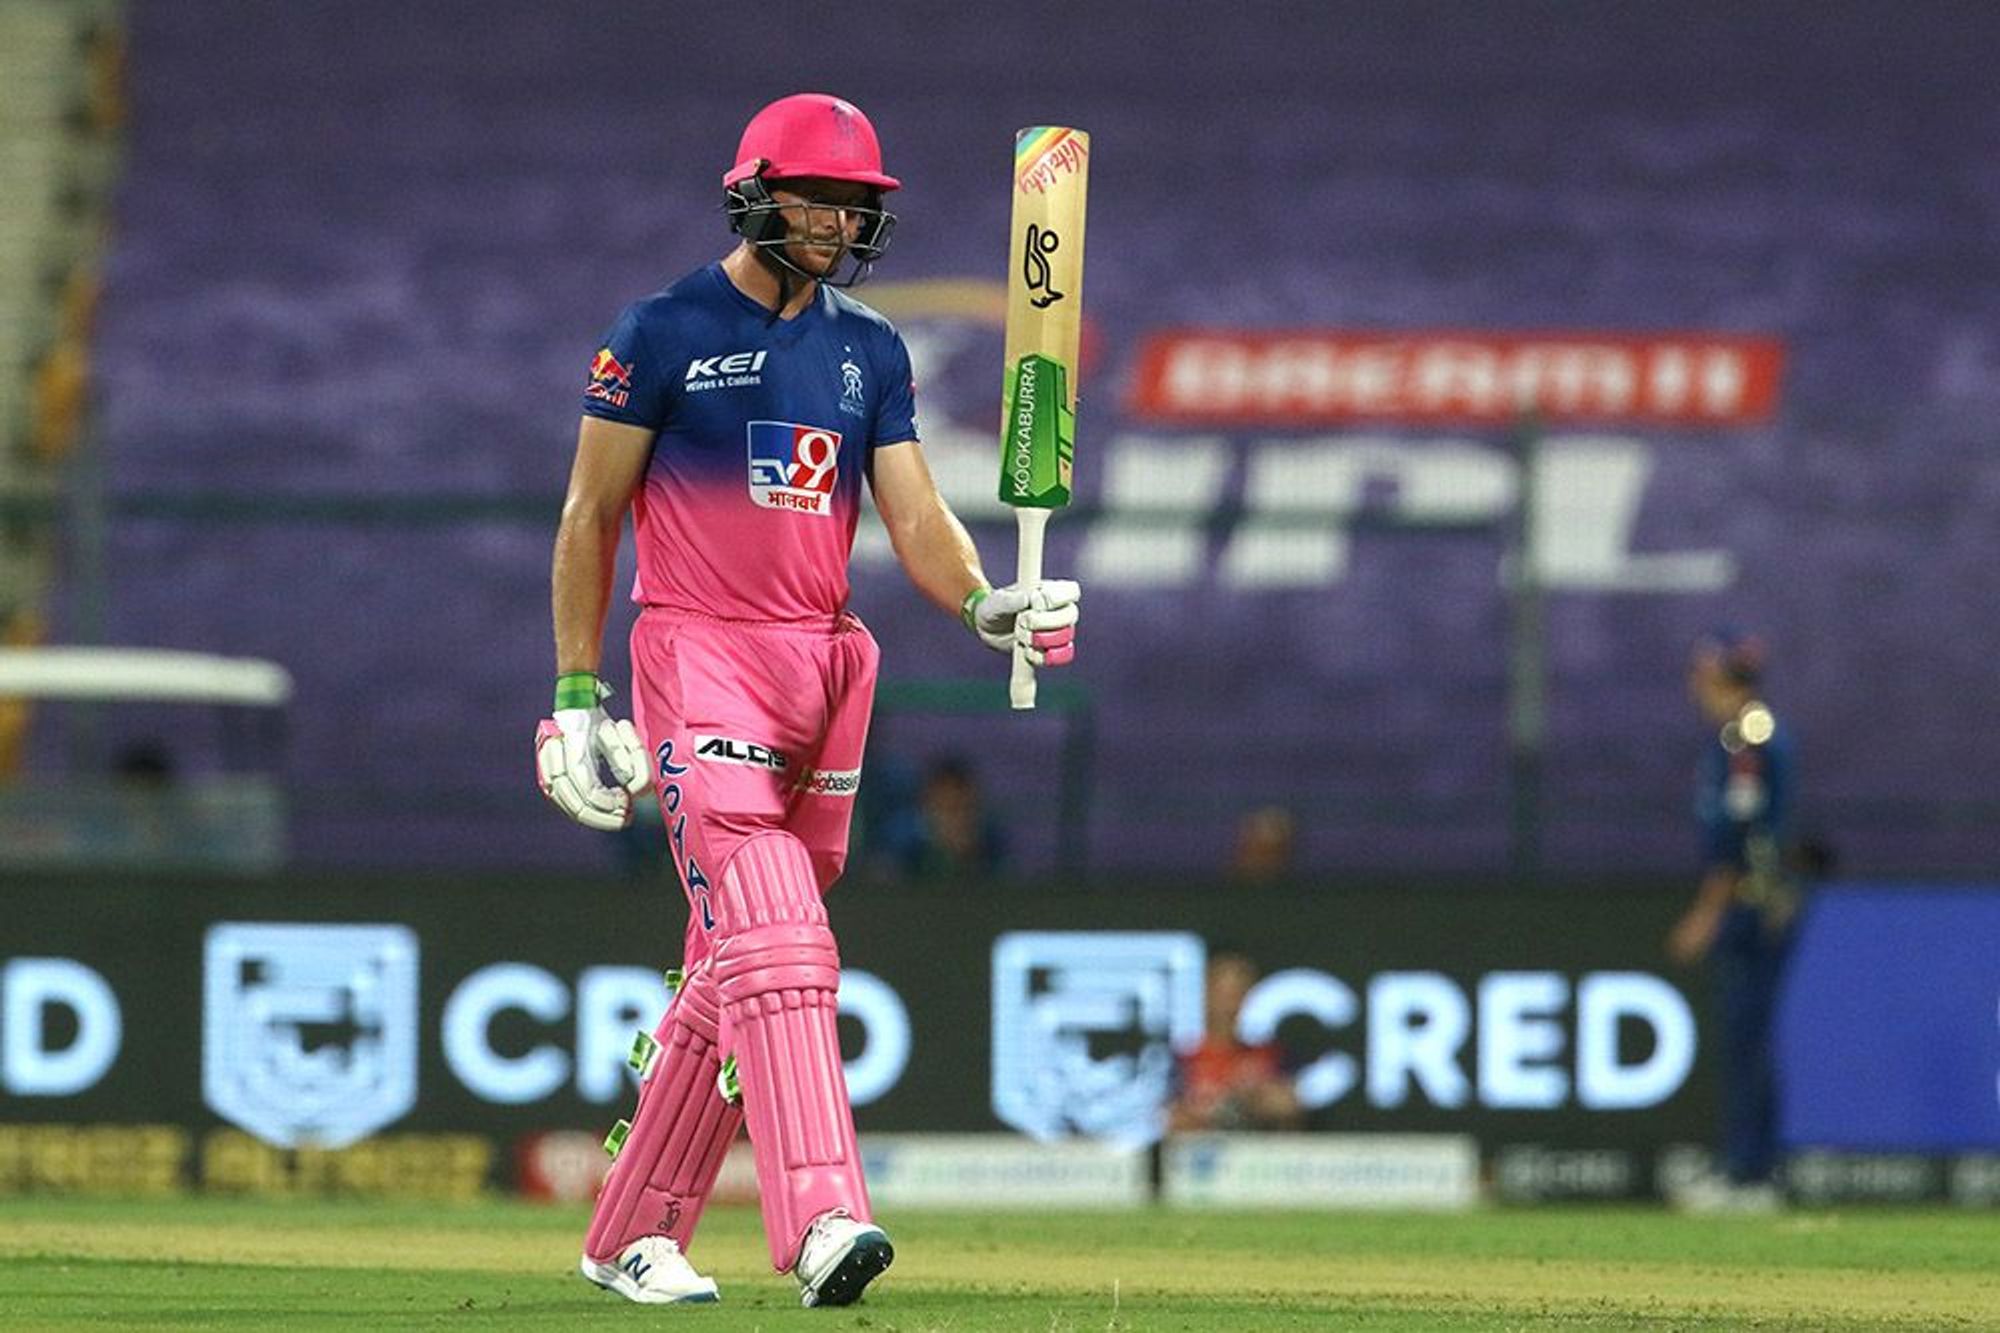 IPL 2021 | No brainer that Jos Buttler should open for Rajasthan Royals, admits Ian Bishop